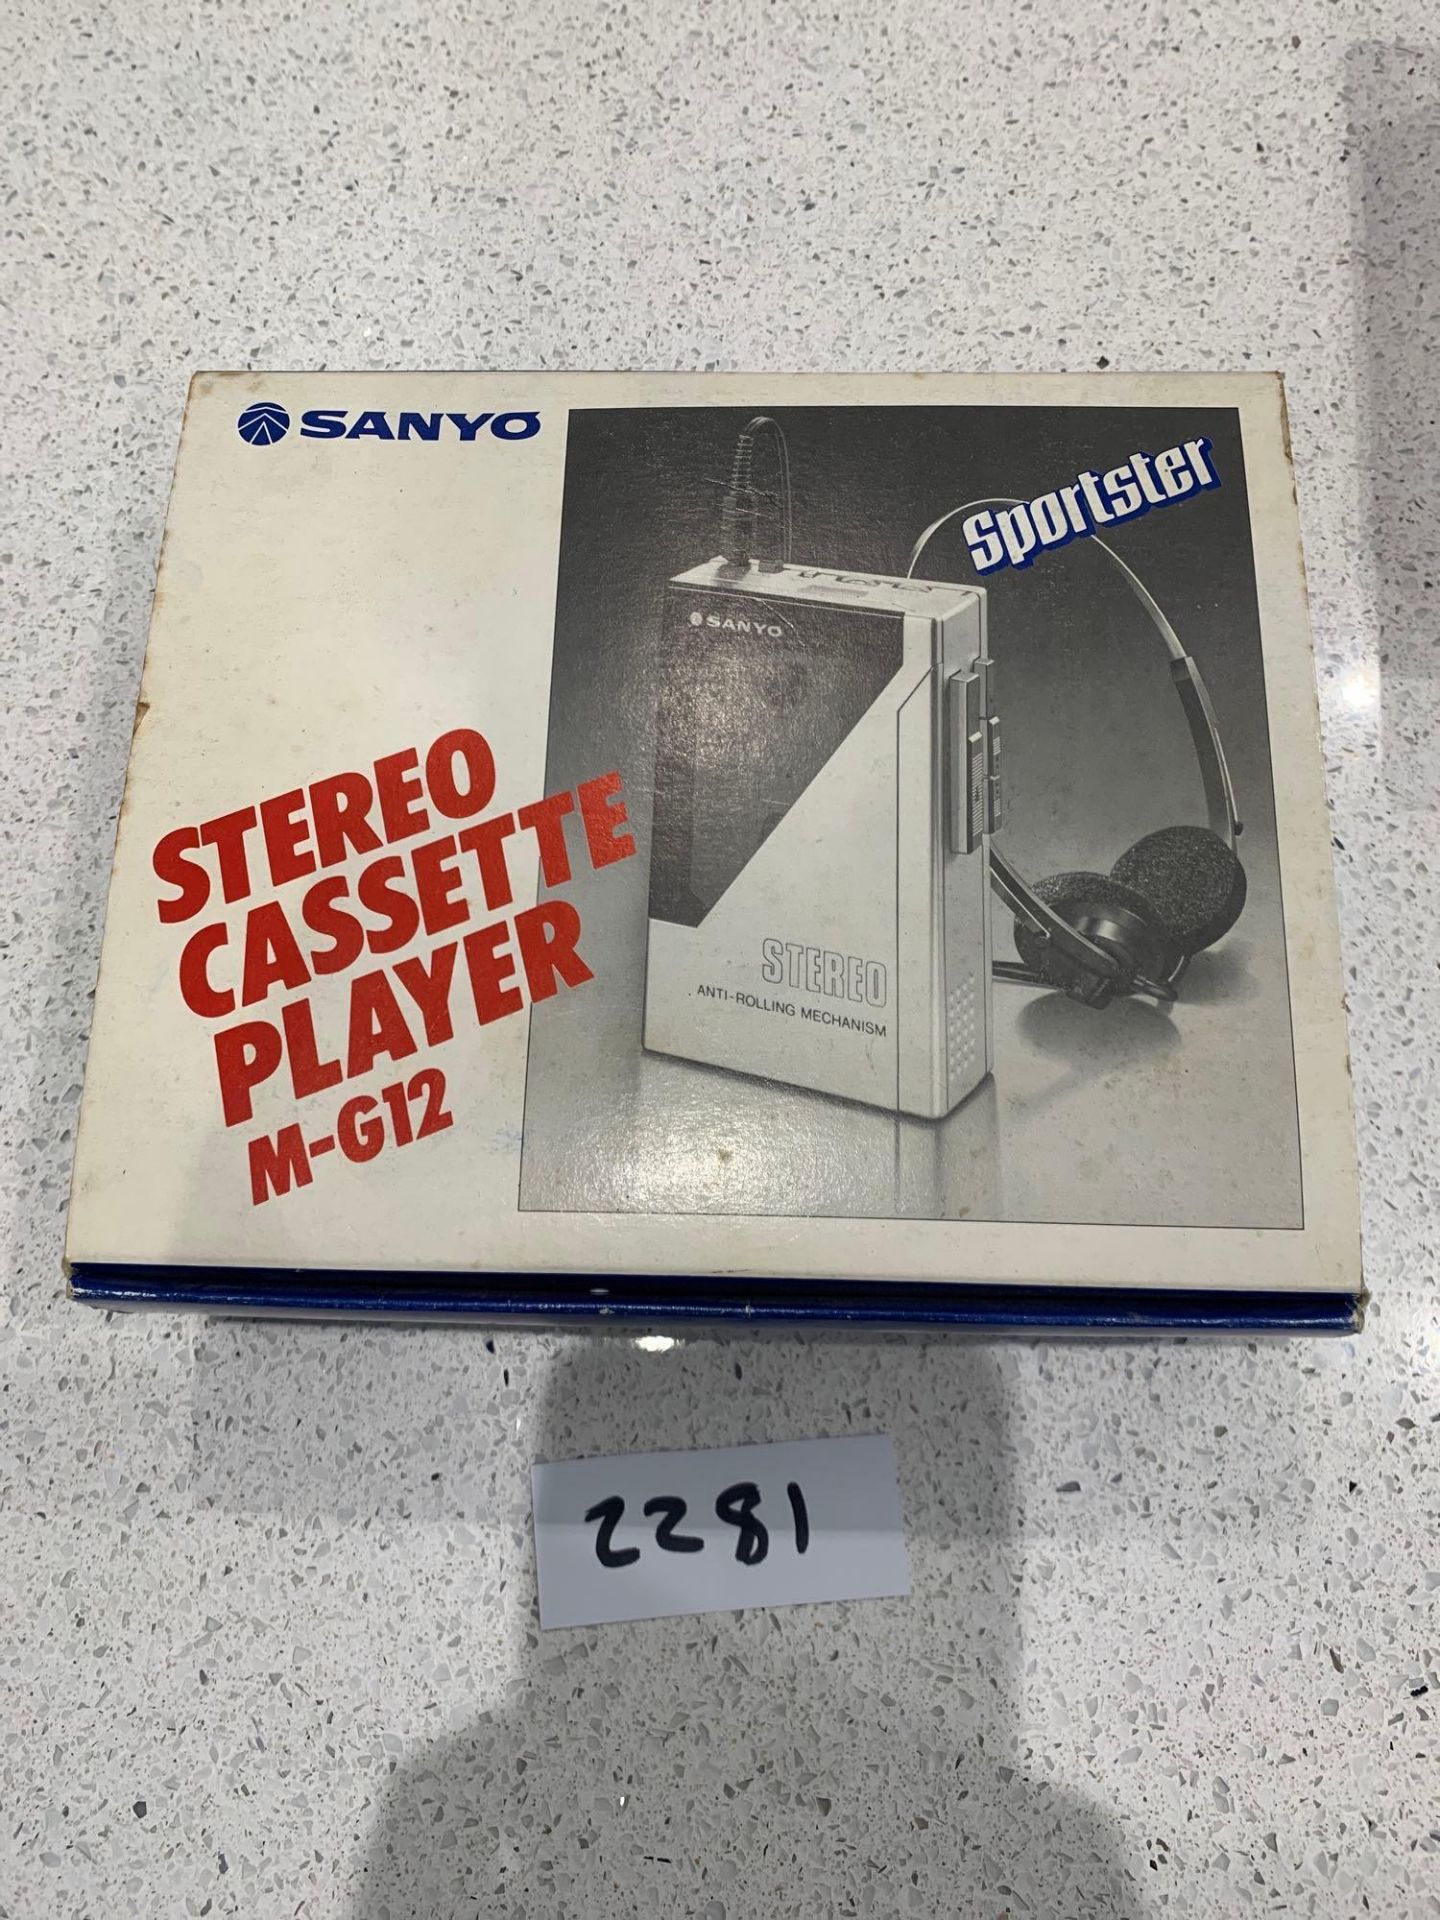 Sanyo Stereo Cassette Player M-G12 The M-G12 Was A Stereo Cassette Player And A Part Of The